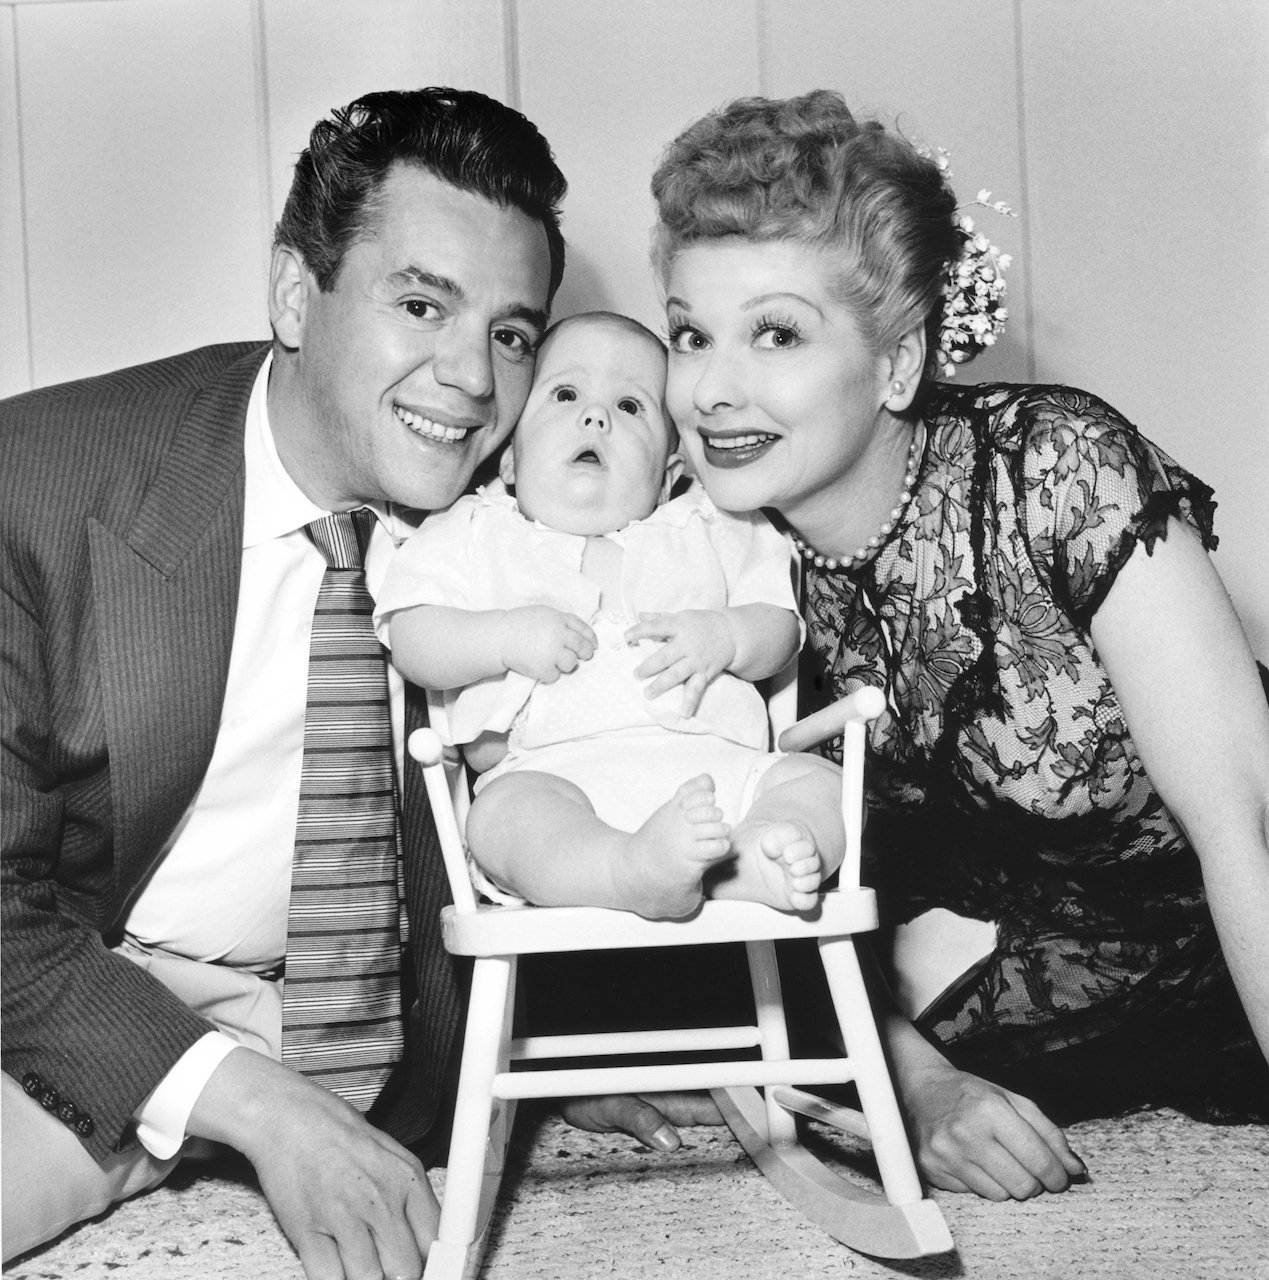 Desi Arnaz and Lucille Ball  pose with their son Desi Arnaz Jr. at their home in California,